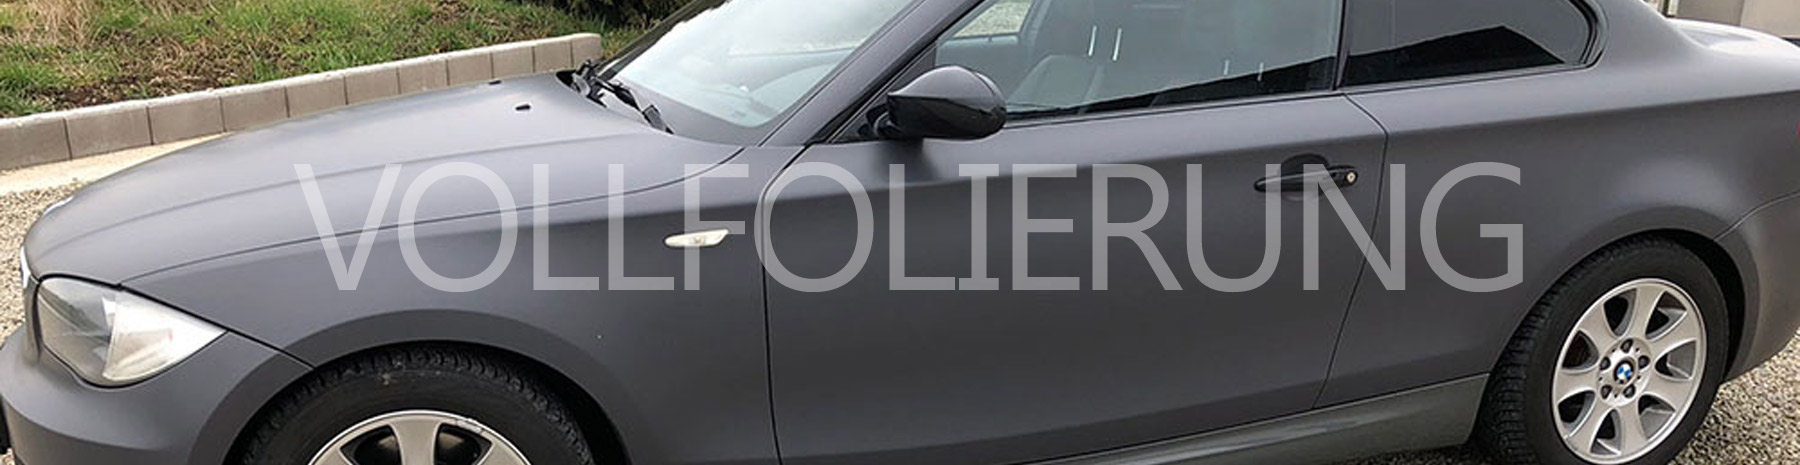 Vollfolierung KFZ Car Wrapping